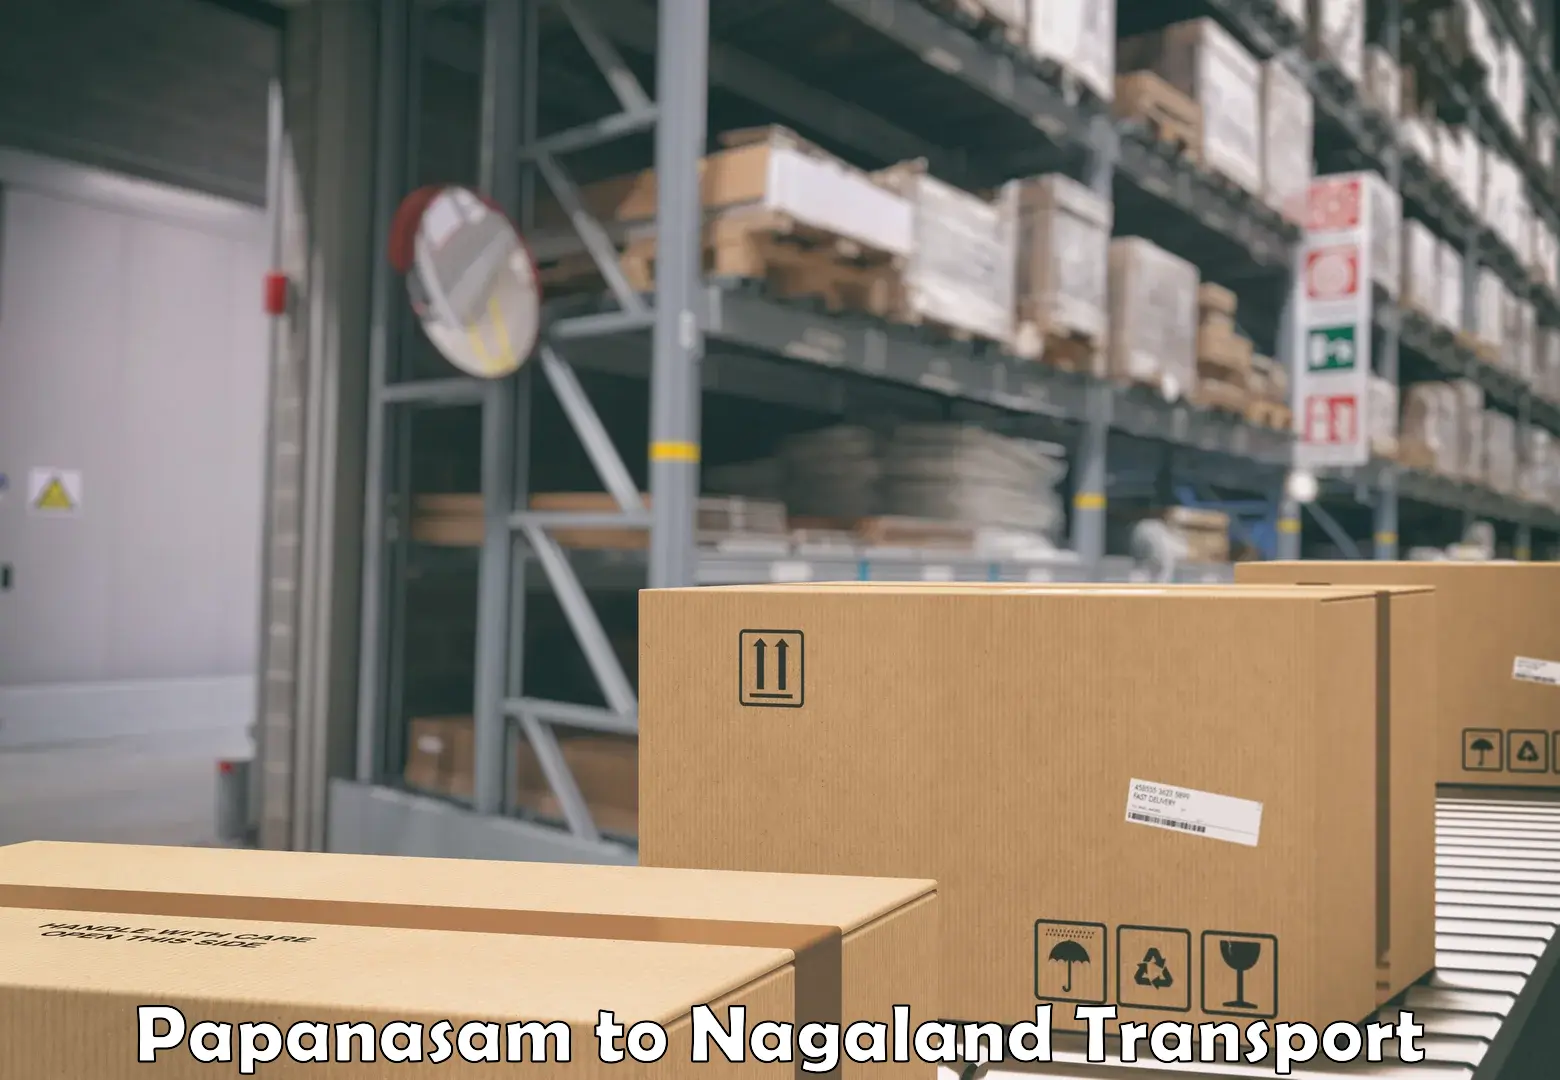 Transport bike from one state to another Papanasam to Nagaland